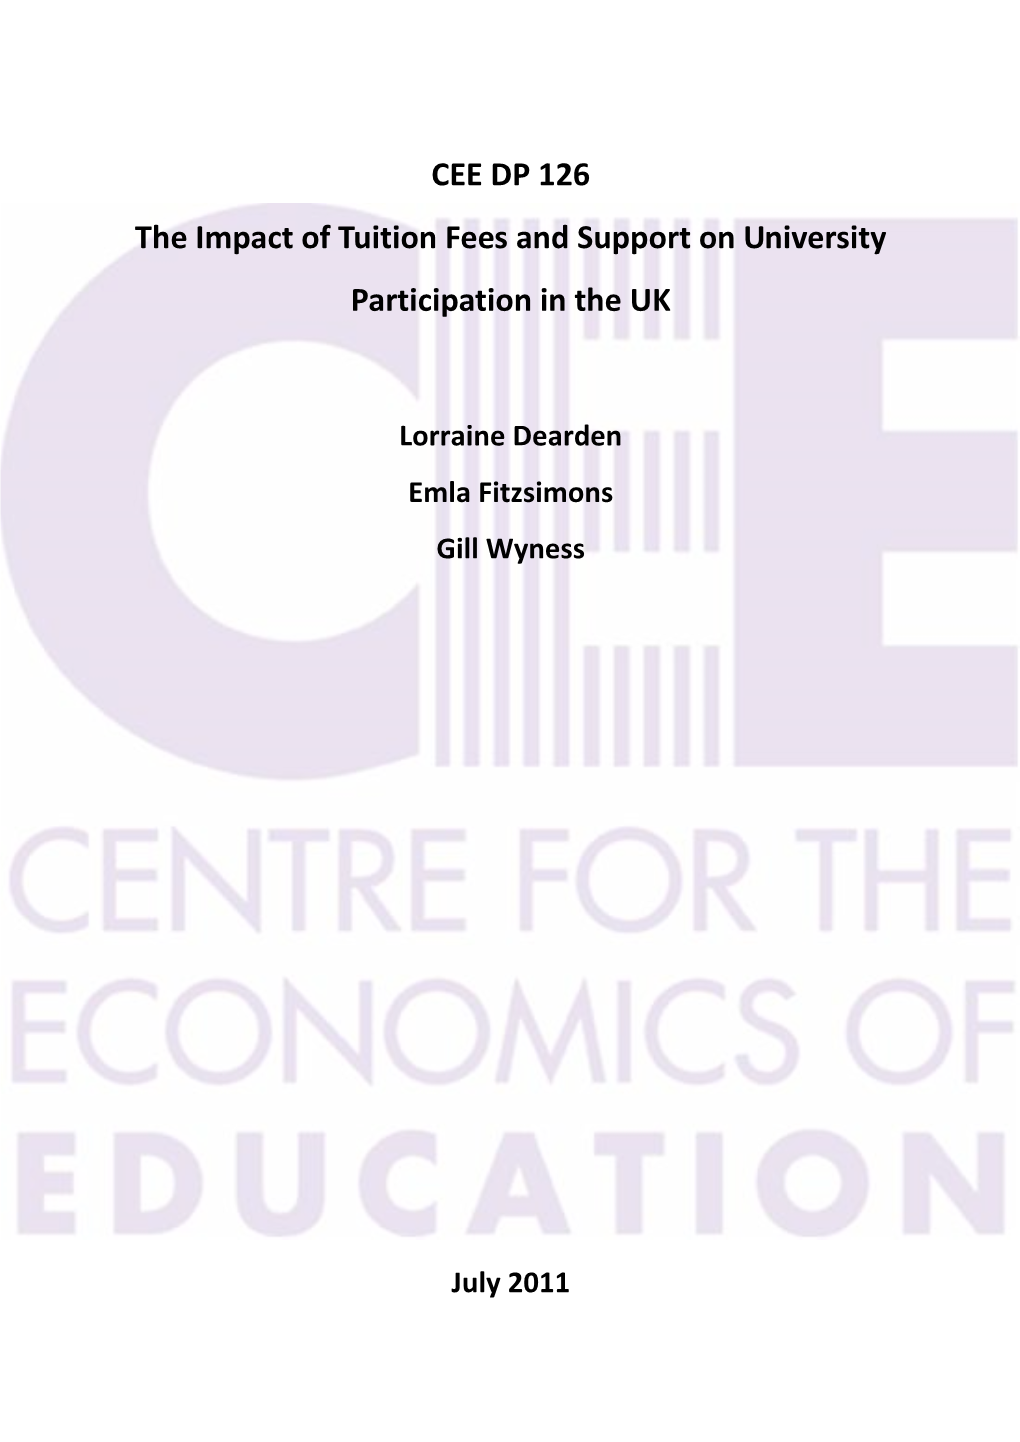 The Impact of Higher Education Finance on Participation in the UK